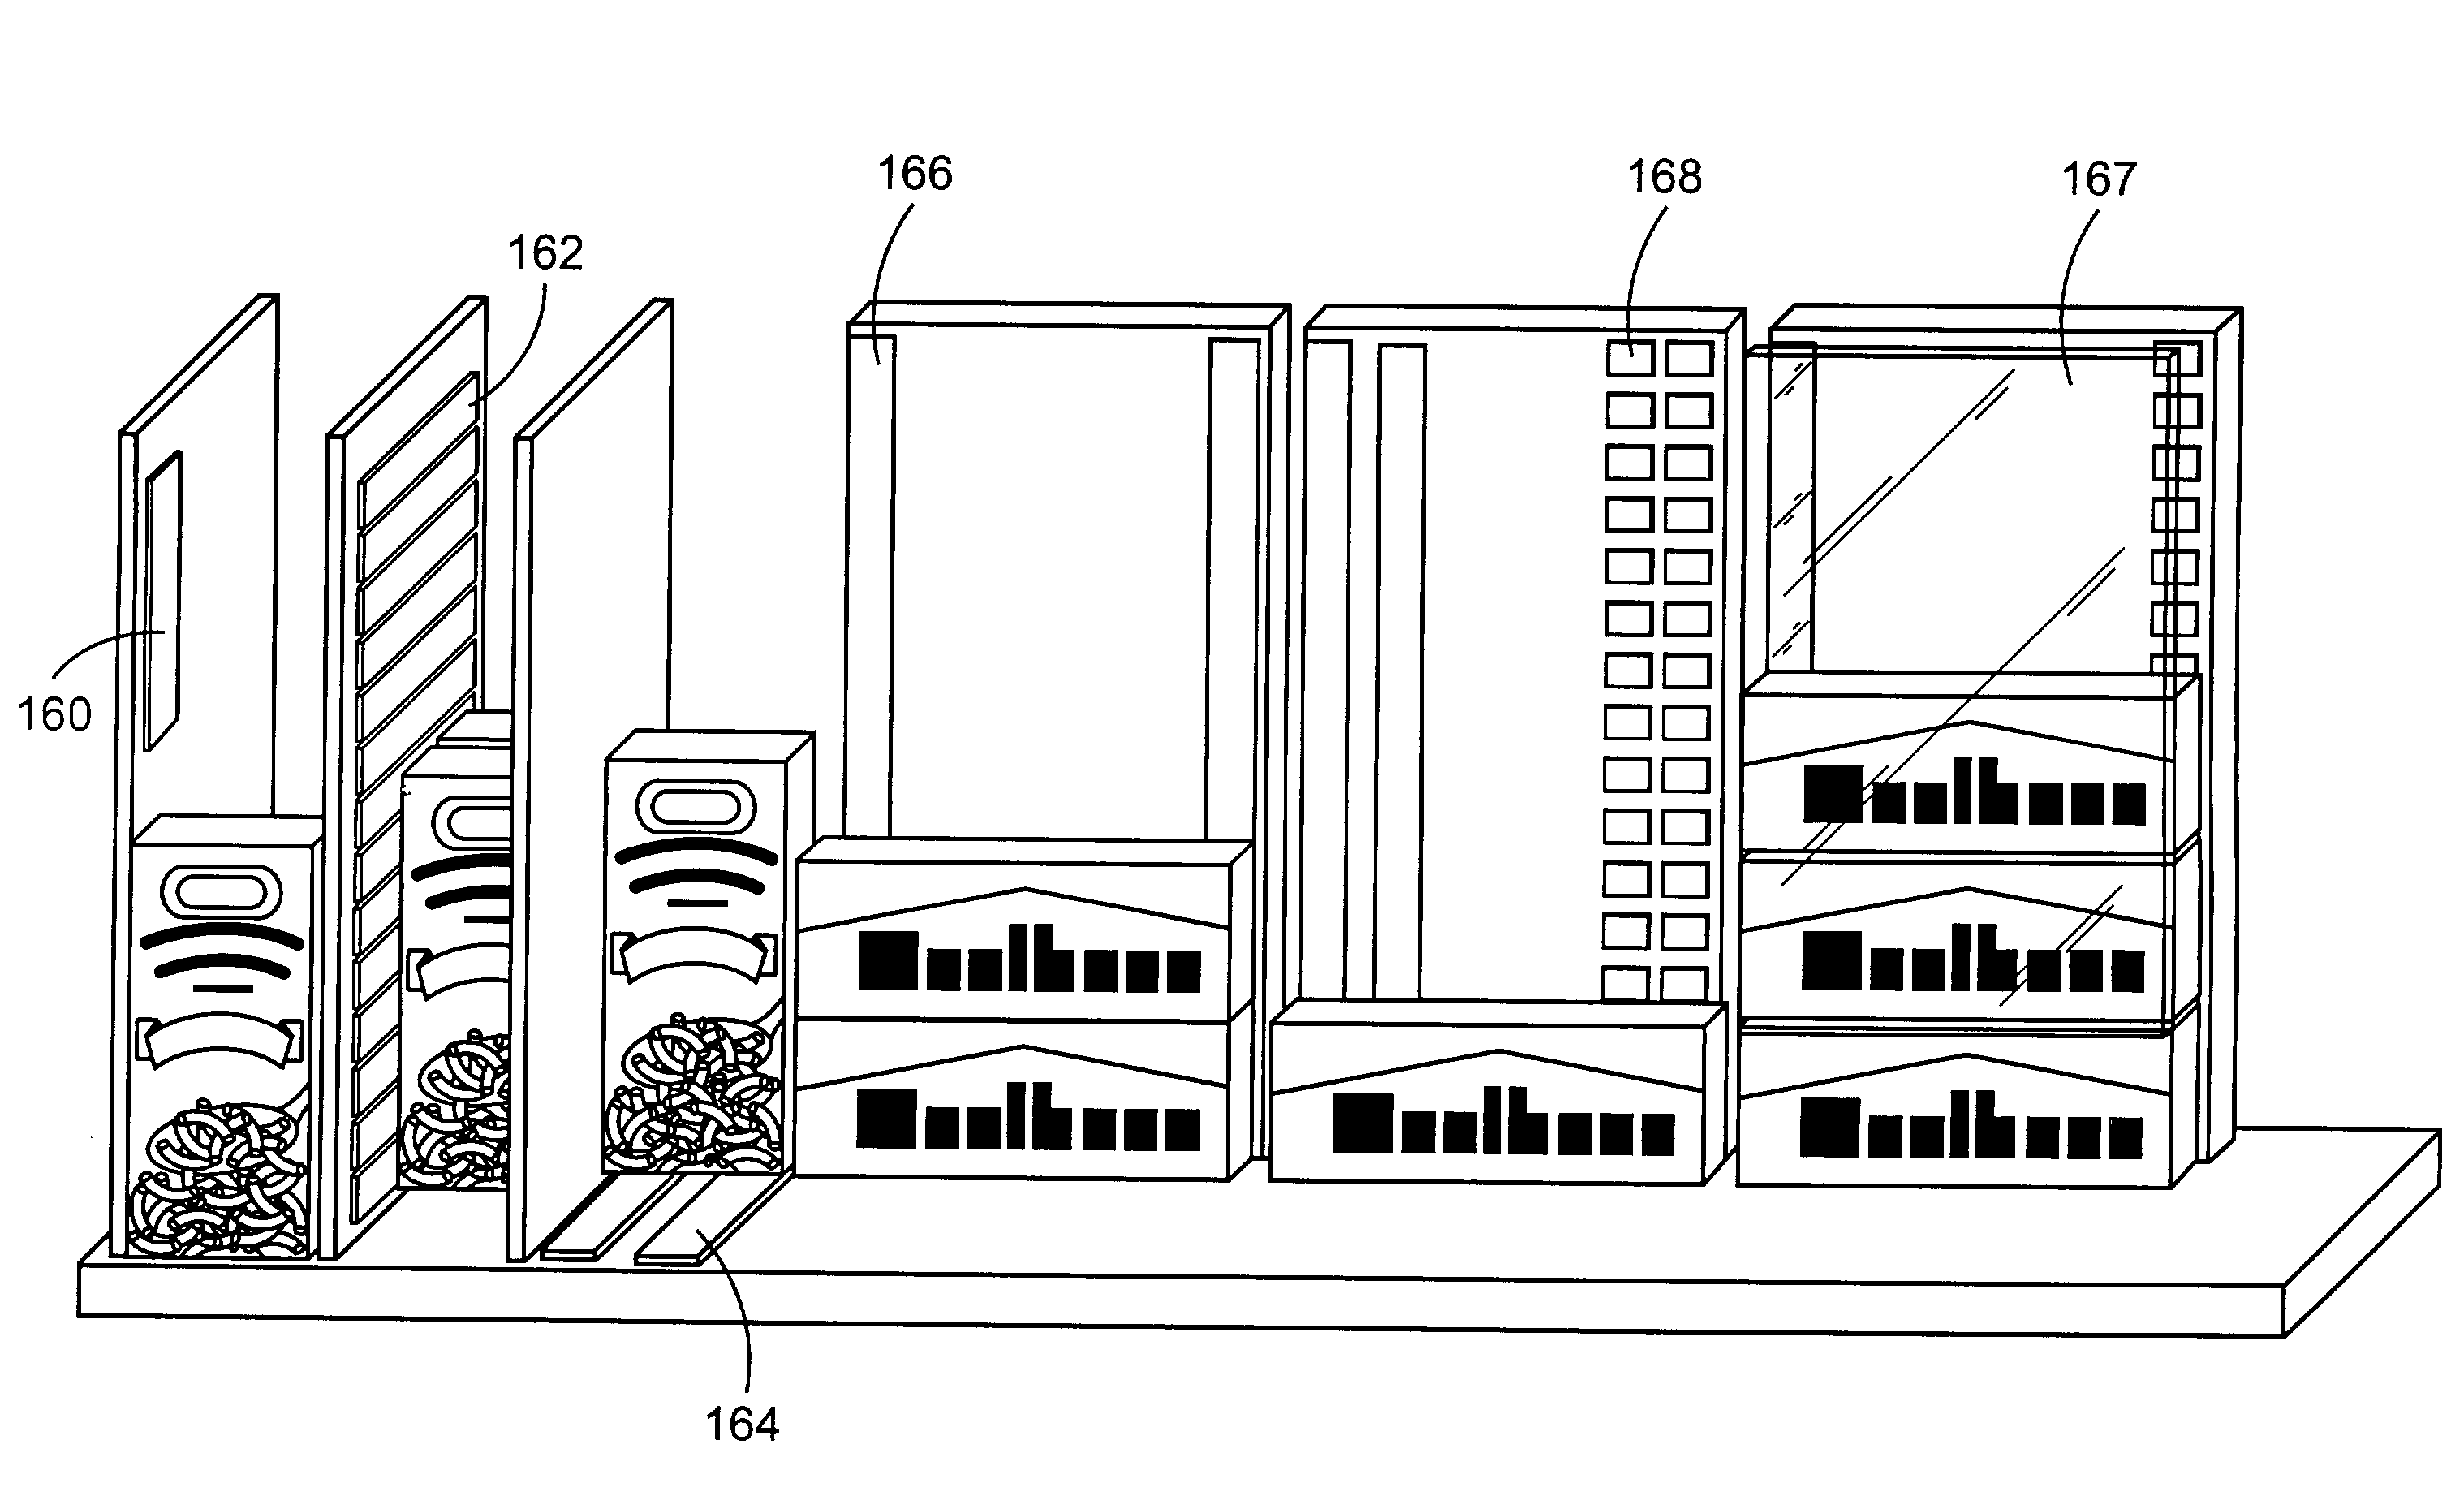 System for coupling package displays to remote power source